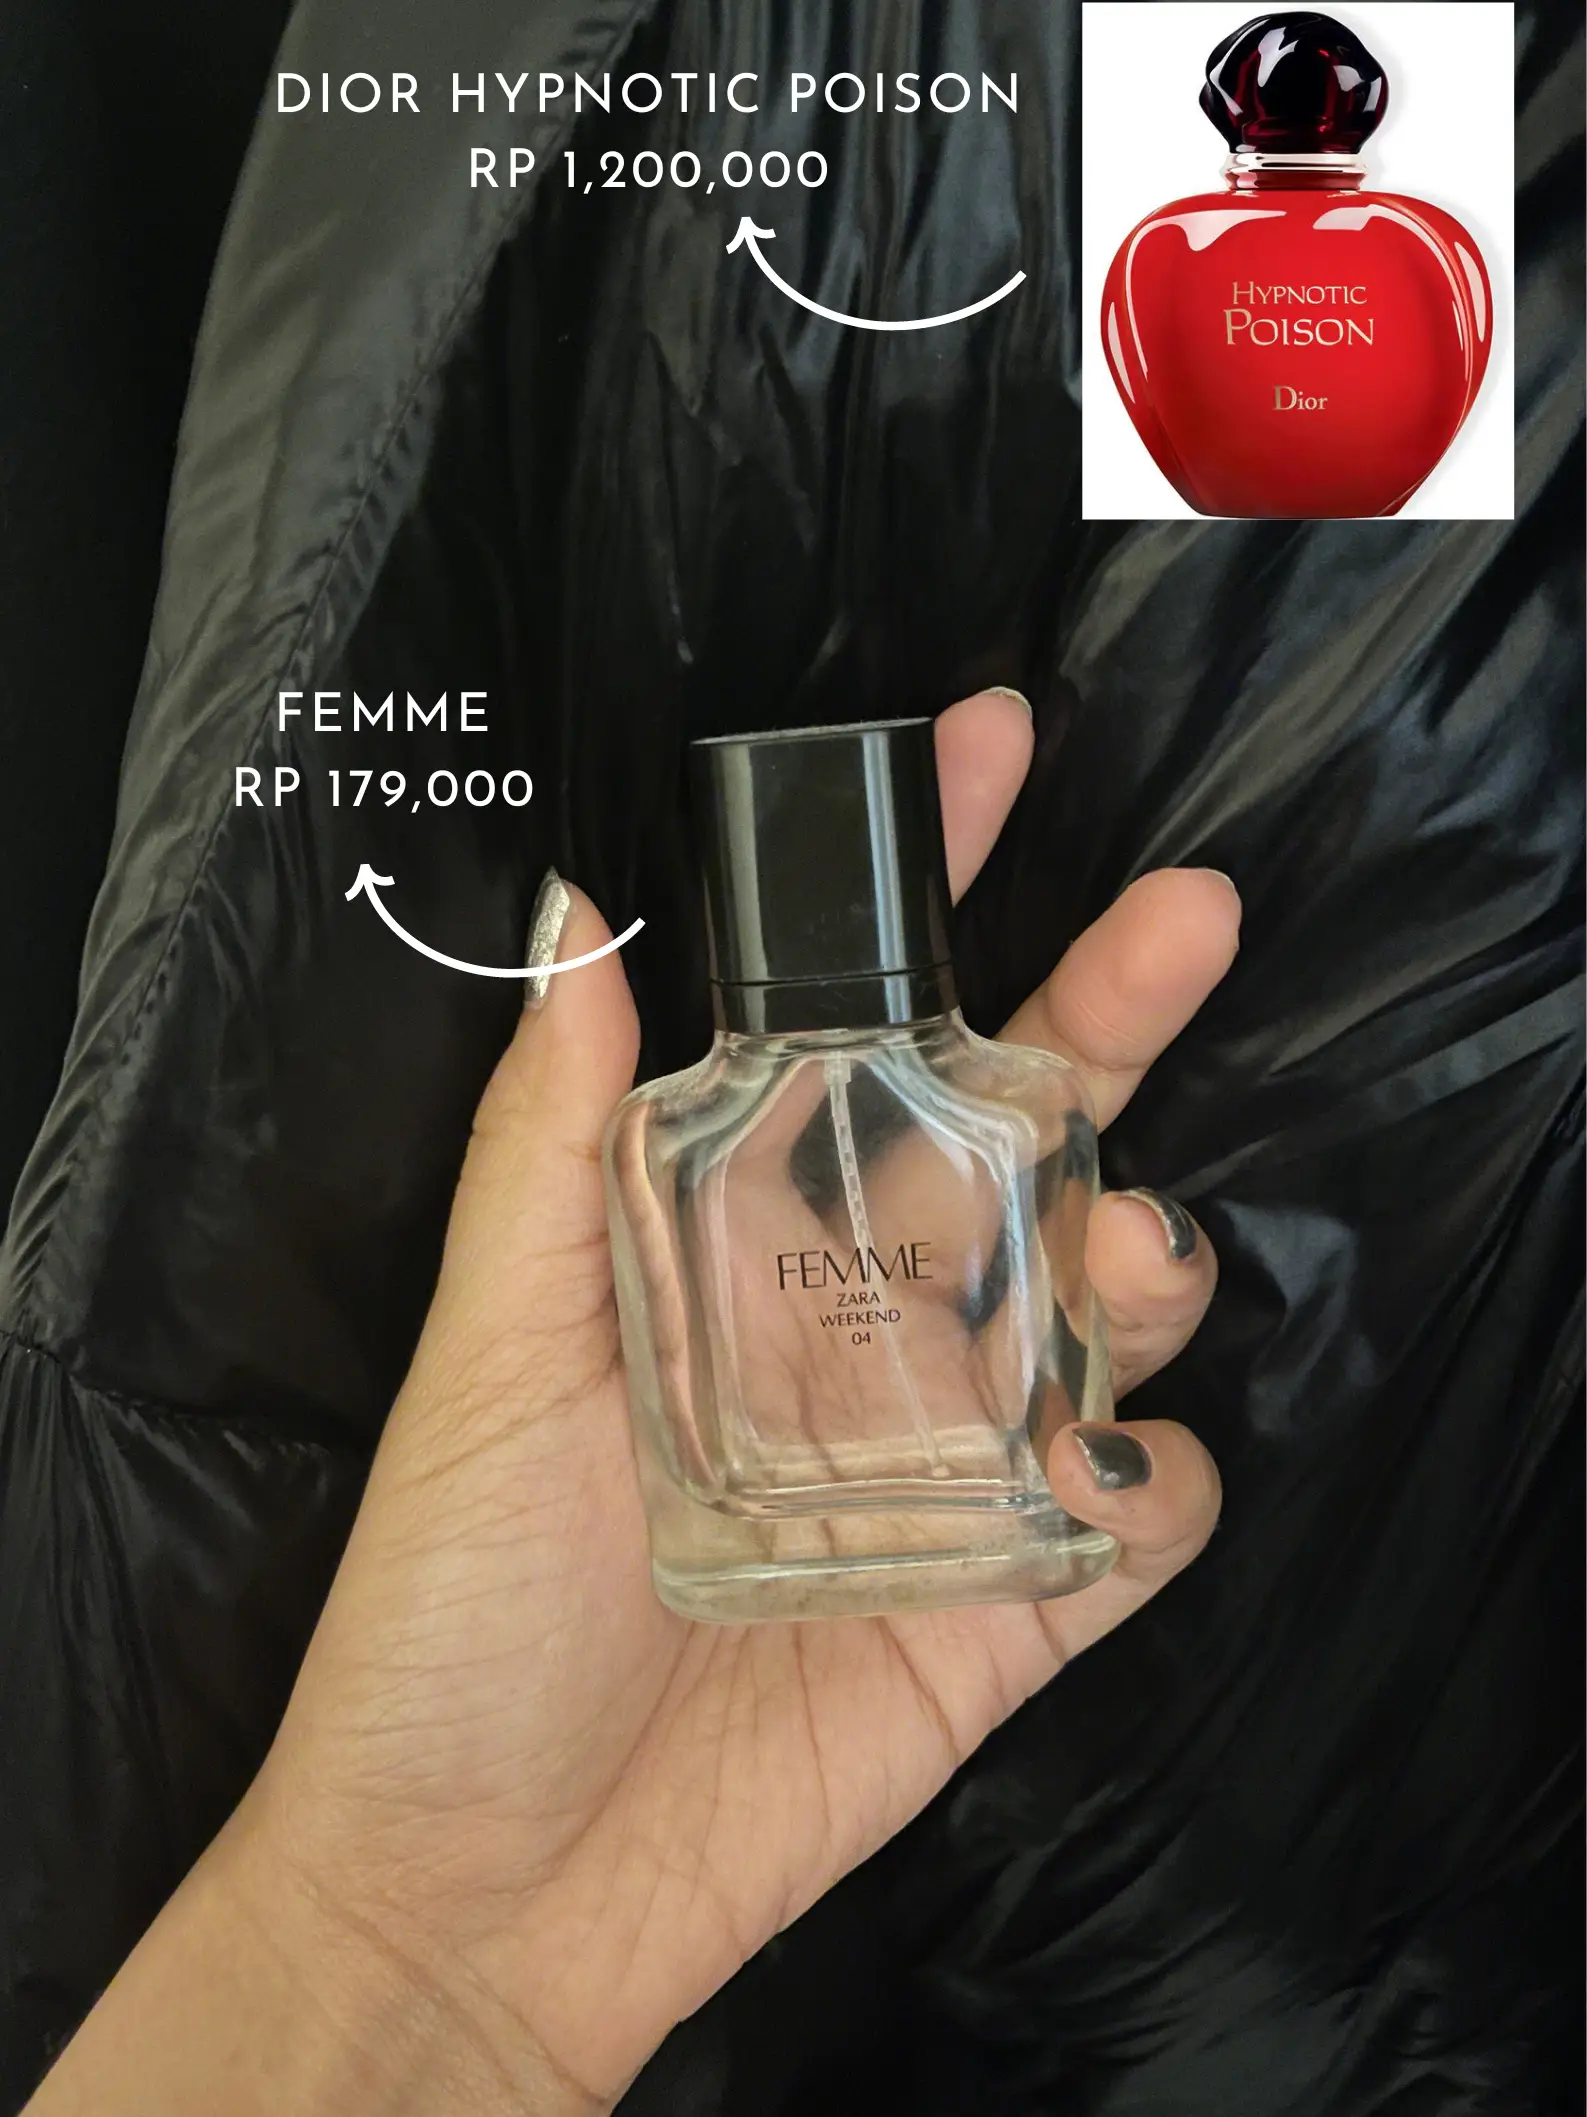 ZARA Dupes Parfum Jutaan!, Gallery posted by PUNGKY